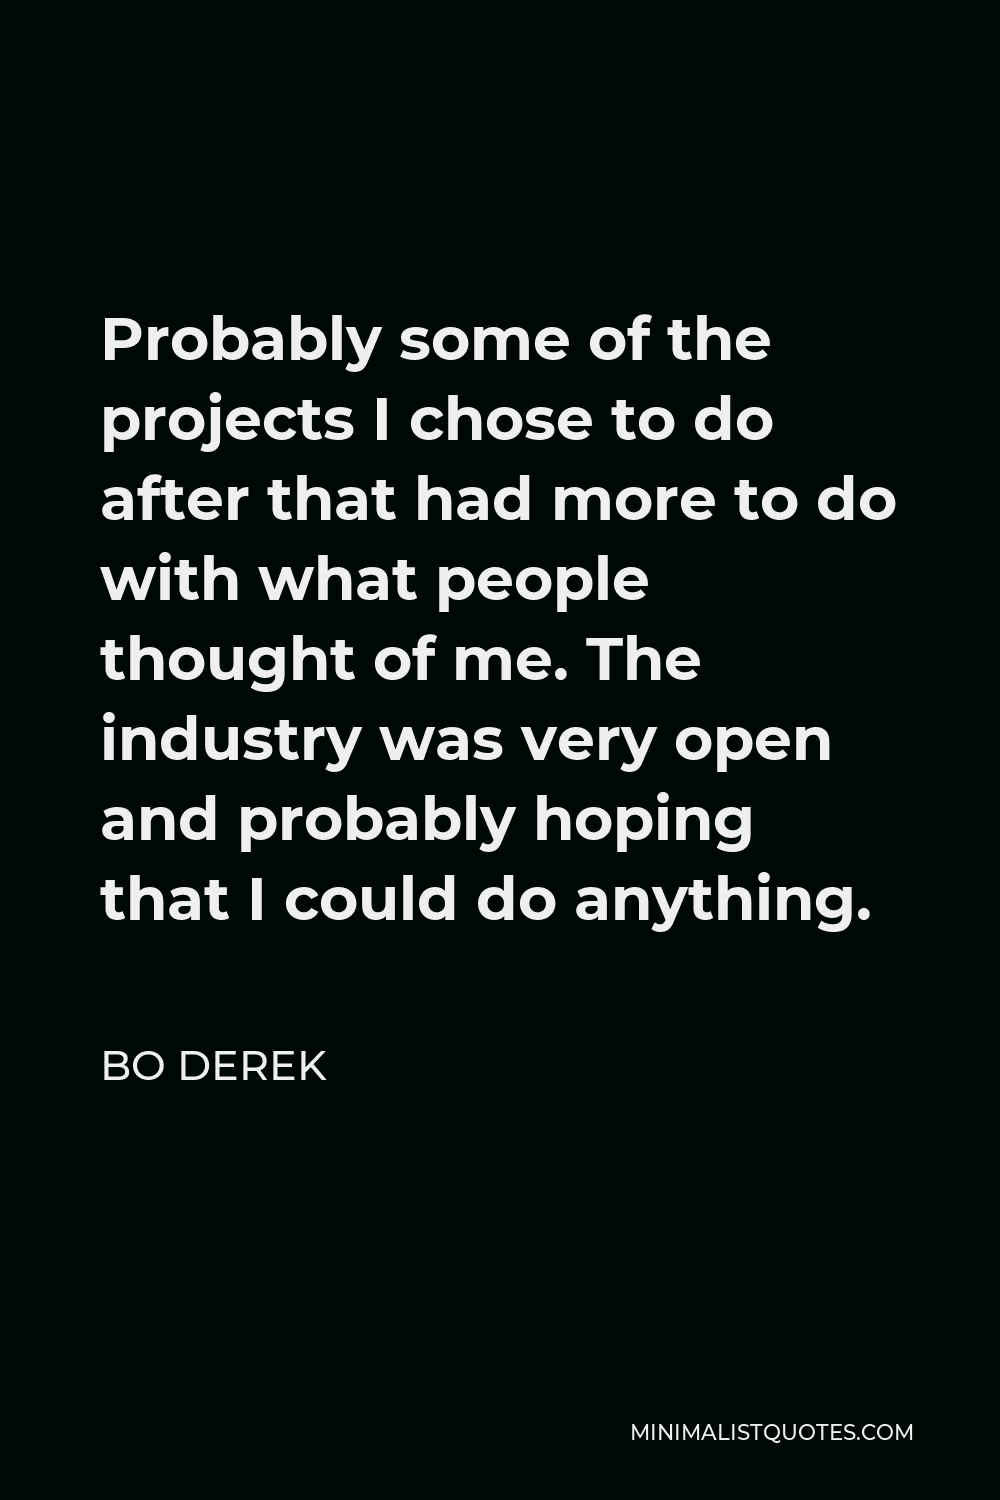 Bo Derek Quote - Probably some of the projects I chose to do after that had more to do with what people thought of me. The industry was very open and probably hoping that I could do anything.